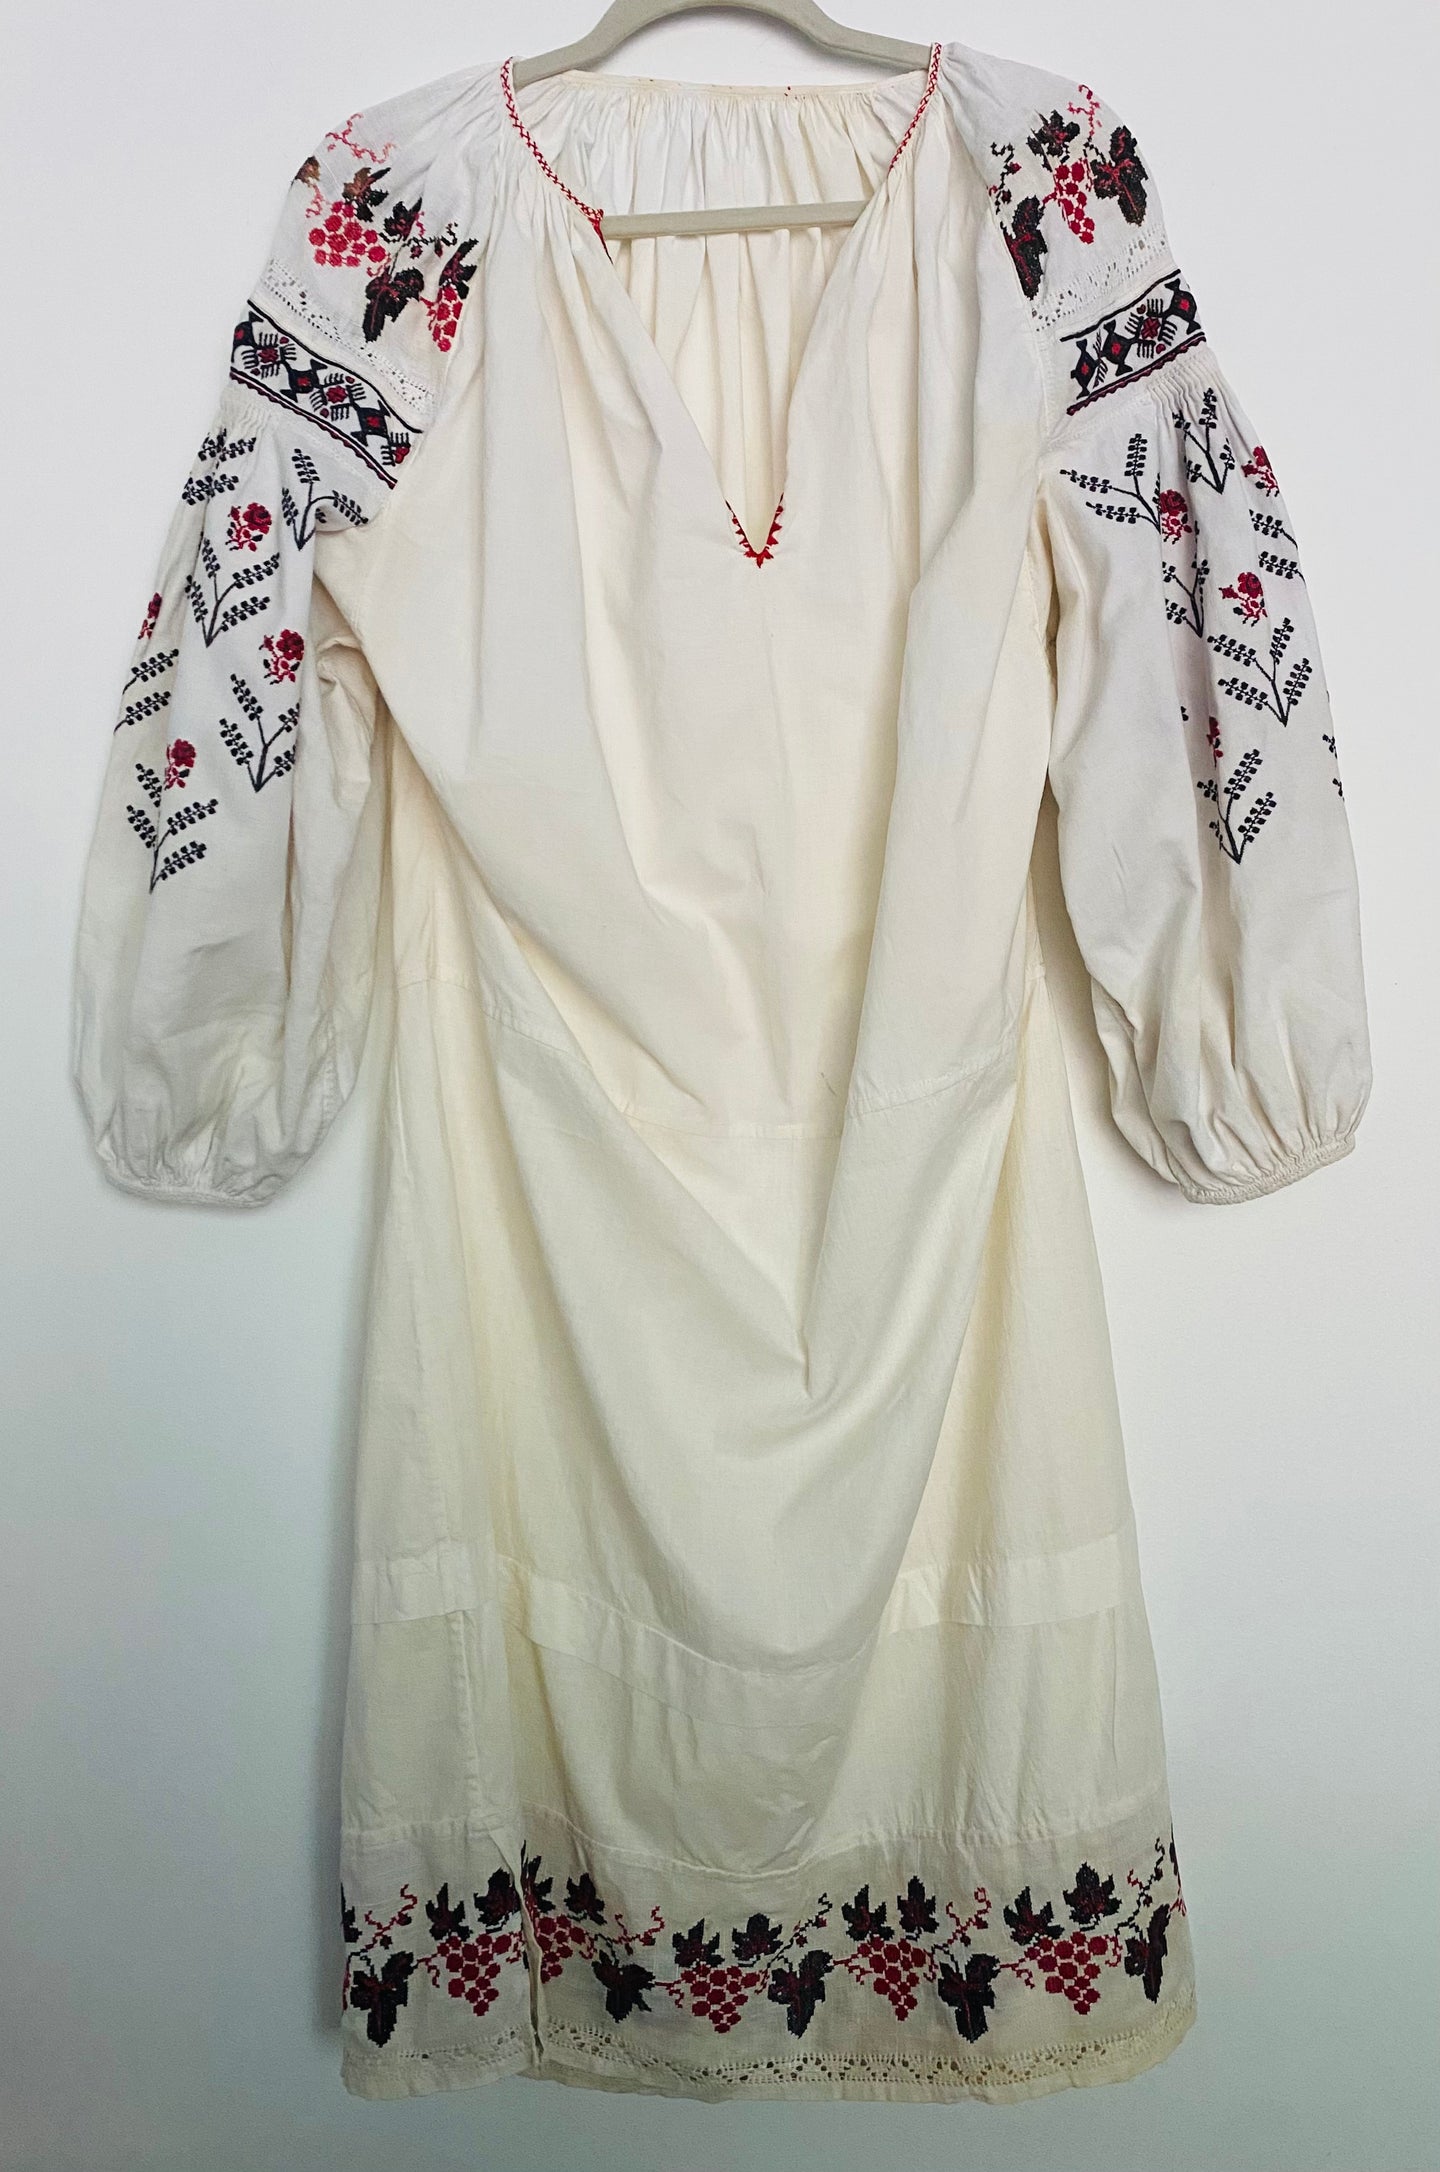 Women’s Vintage Embroidered Dress #350